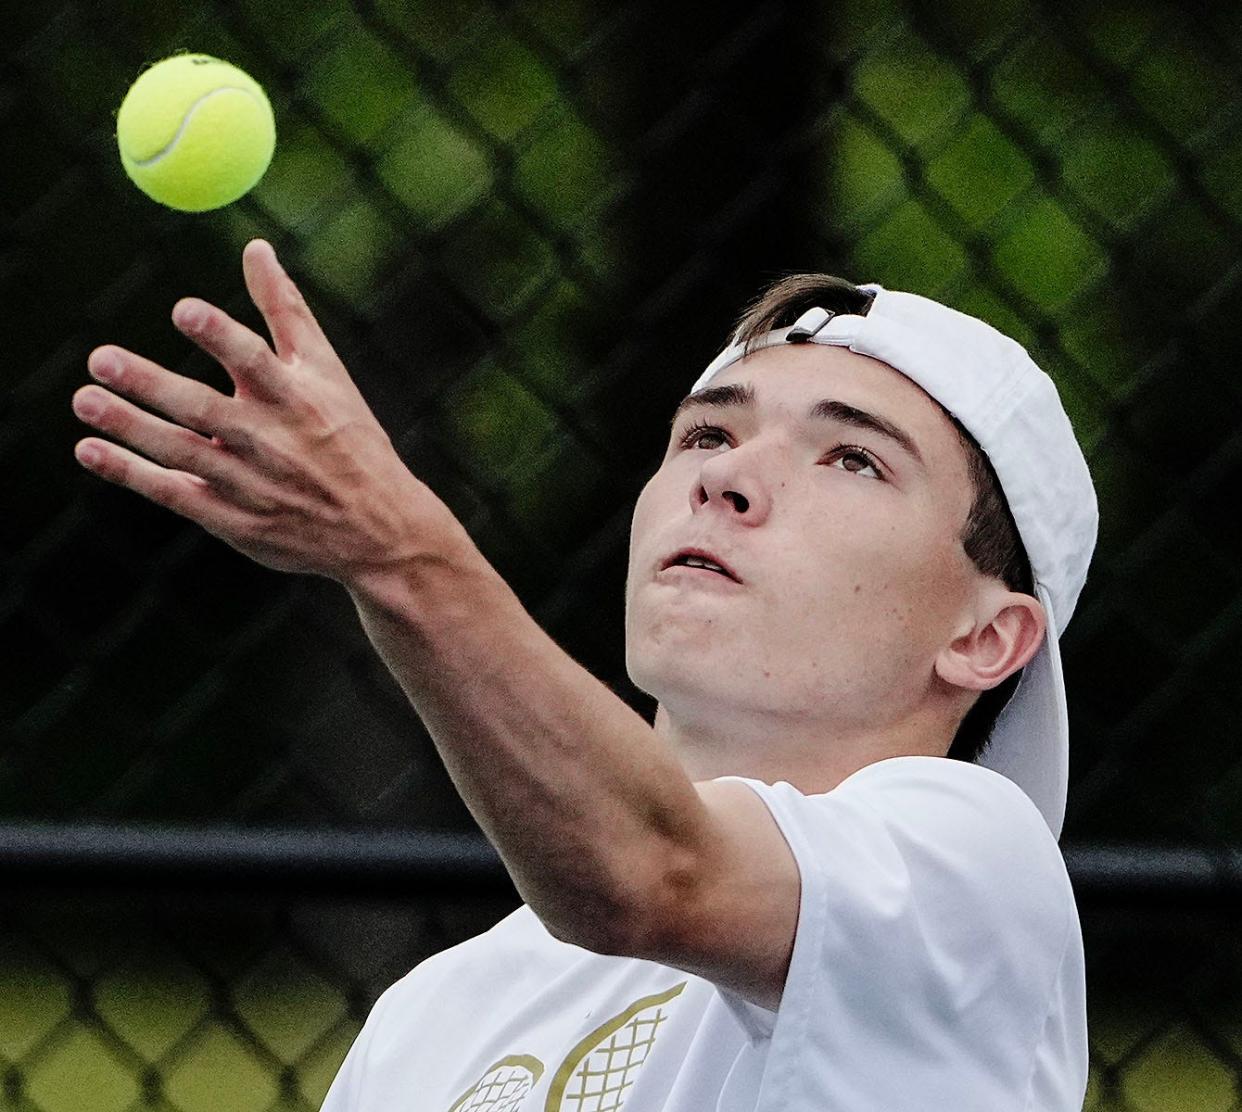 St. Raphael's Travis Chartier is a tennis star but also earned All-State honors in soccer.